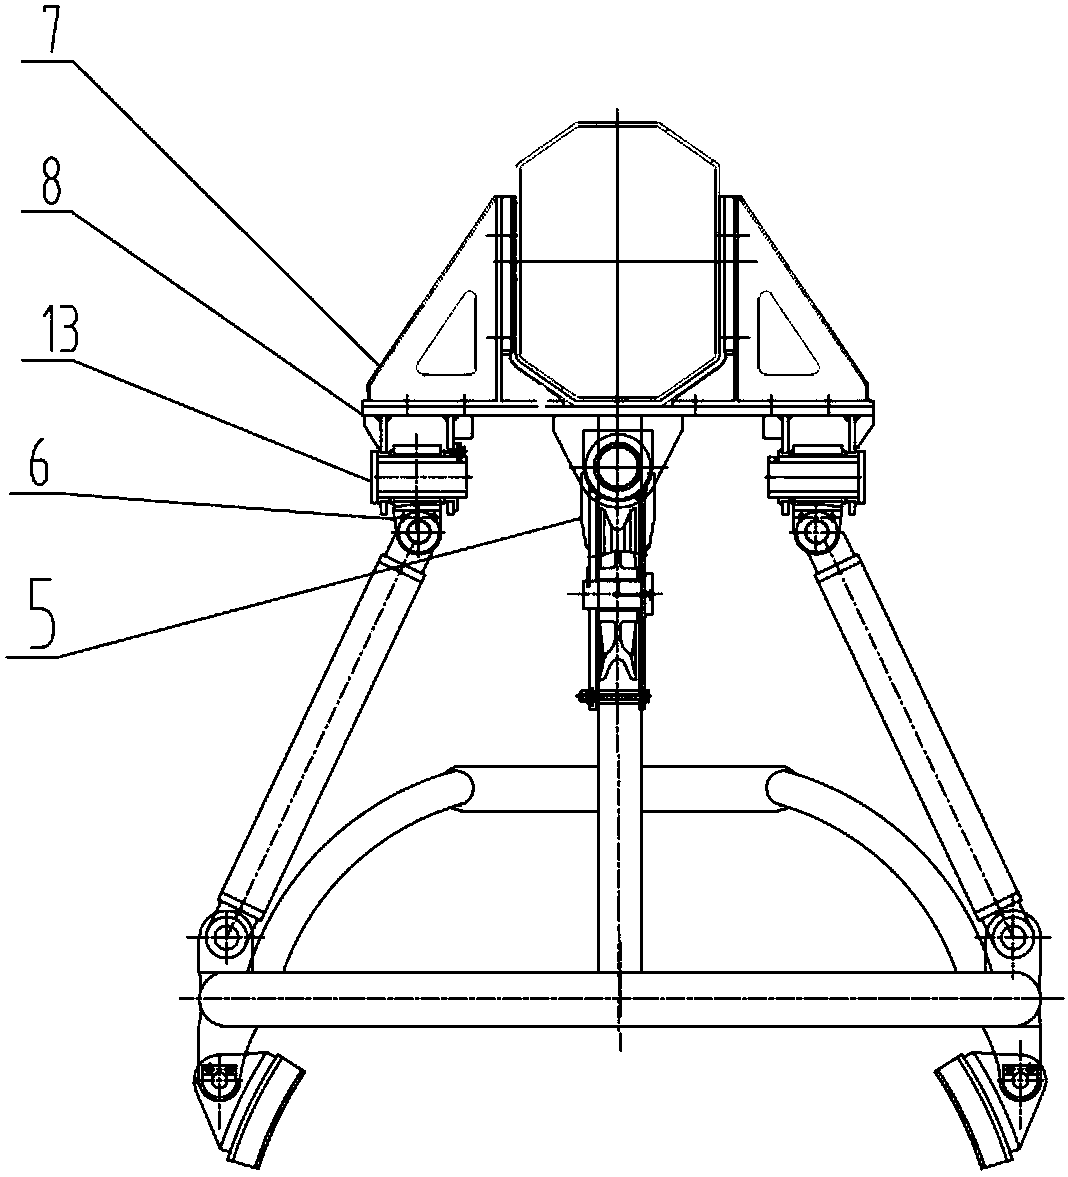 Lifting and anti-shaking device for marine crane